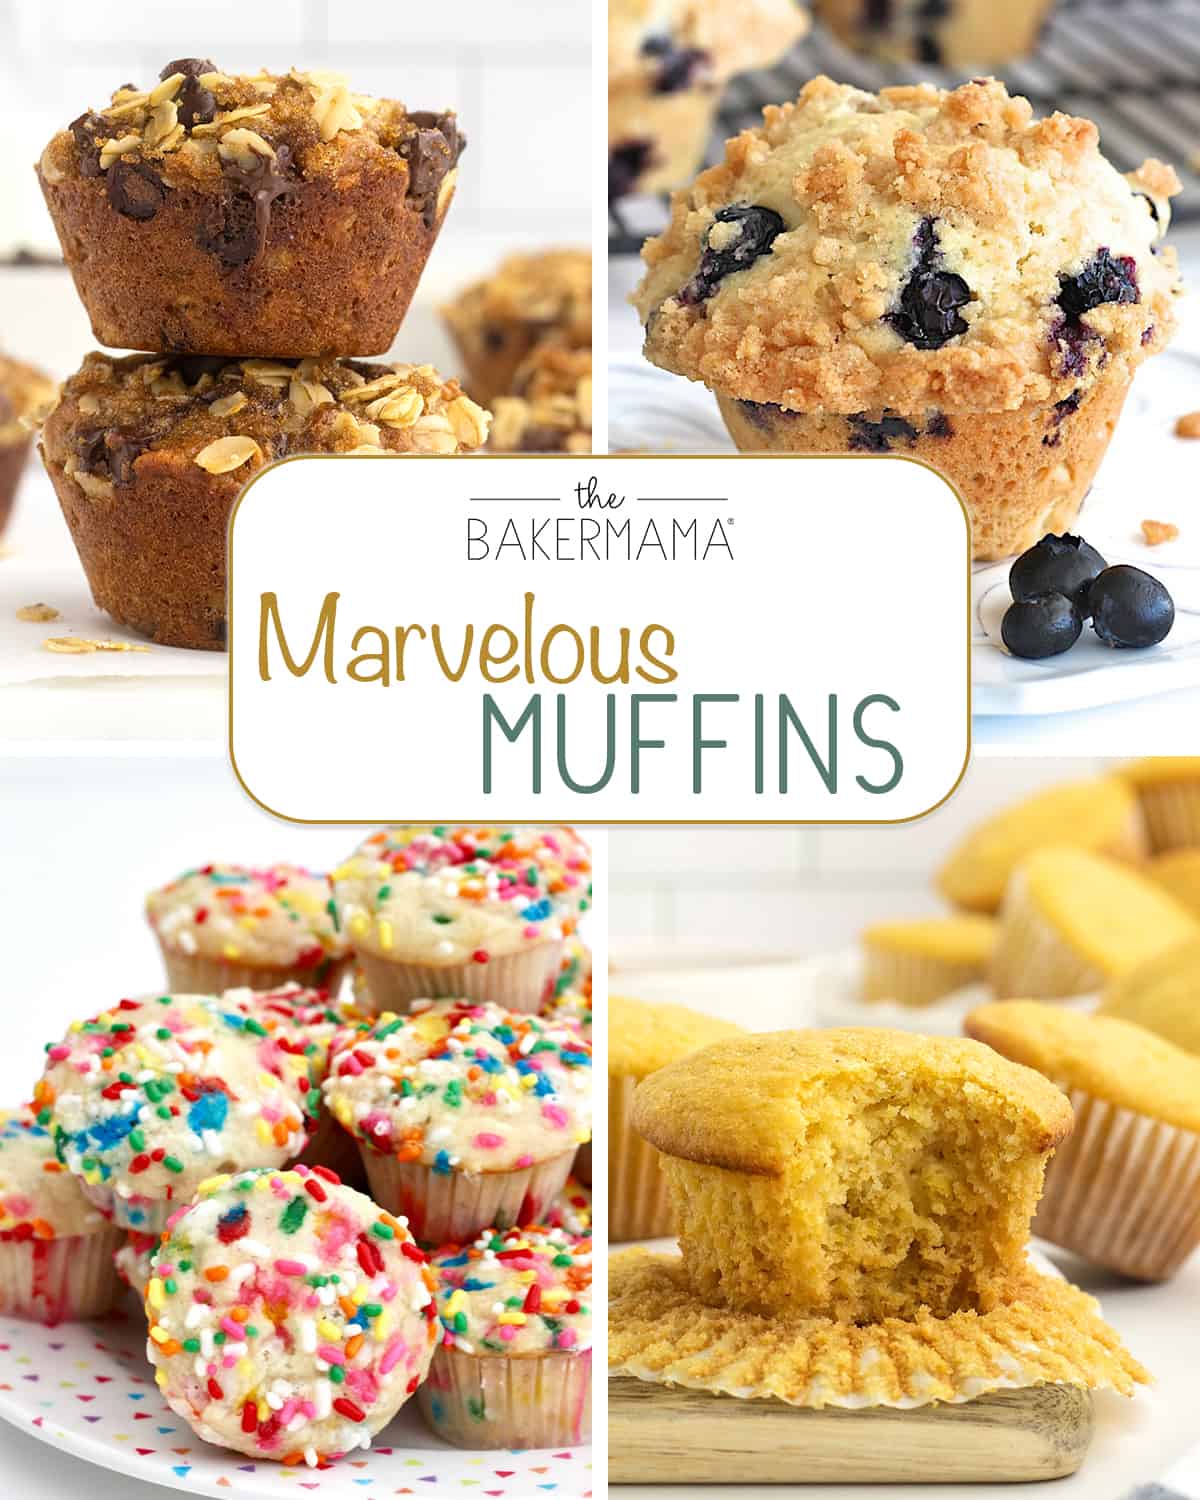 Marvelous Muffin Recipes by The BakerMama